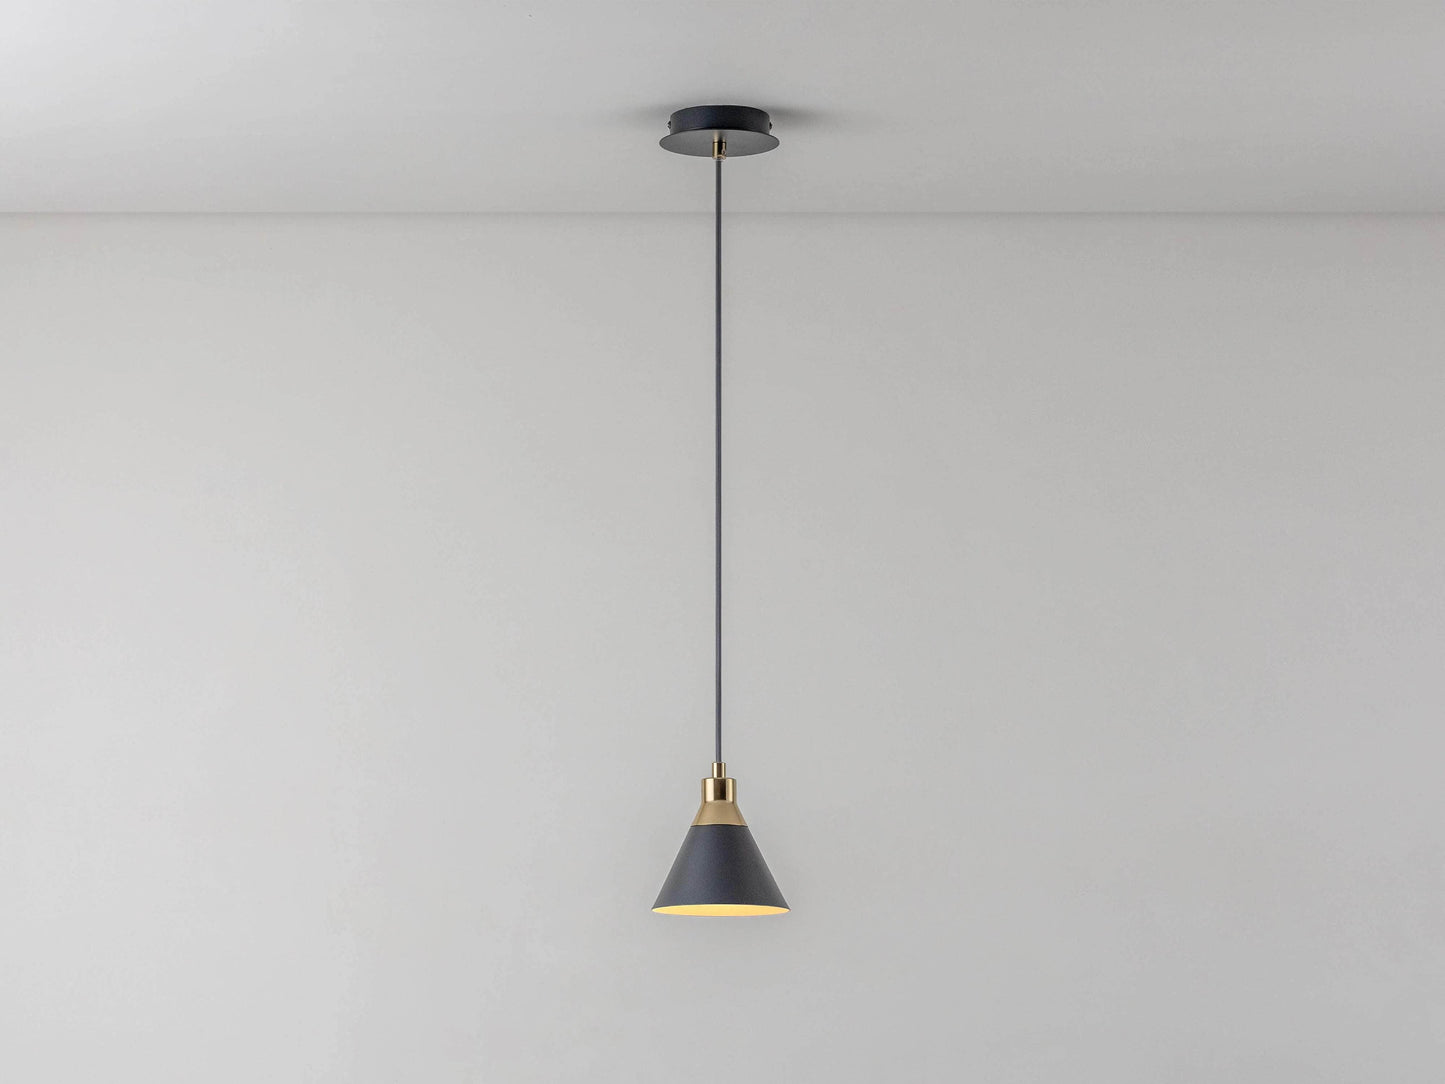 Charcoal grey cone pendent ceiling light